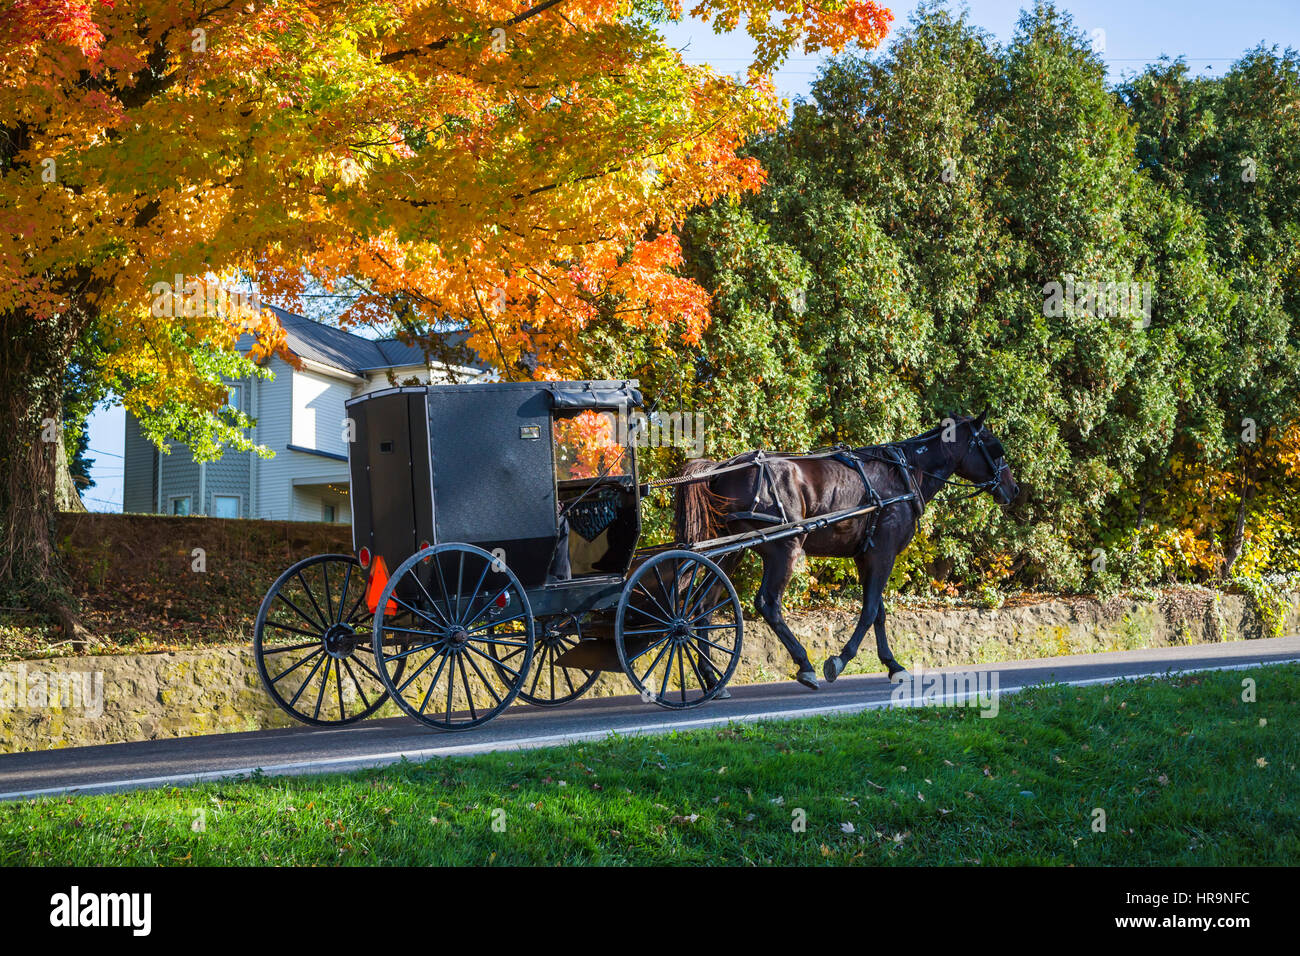 A horse and buggy on a rural road in Amish country with fall foliage color  near Walnut Creek, Ohio, USA. Stock Photo